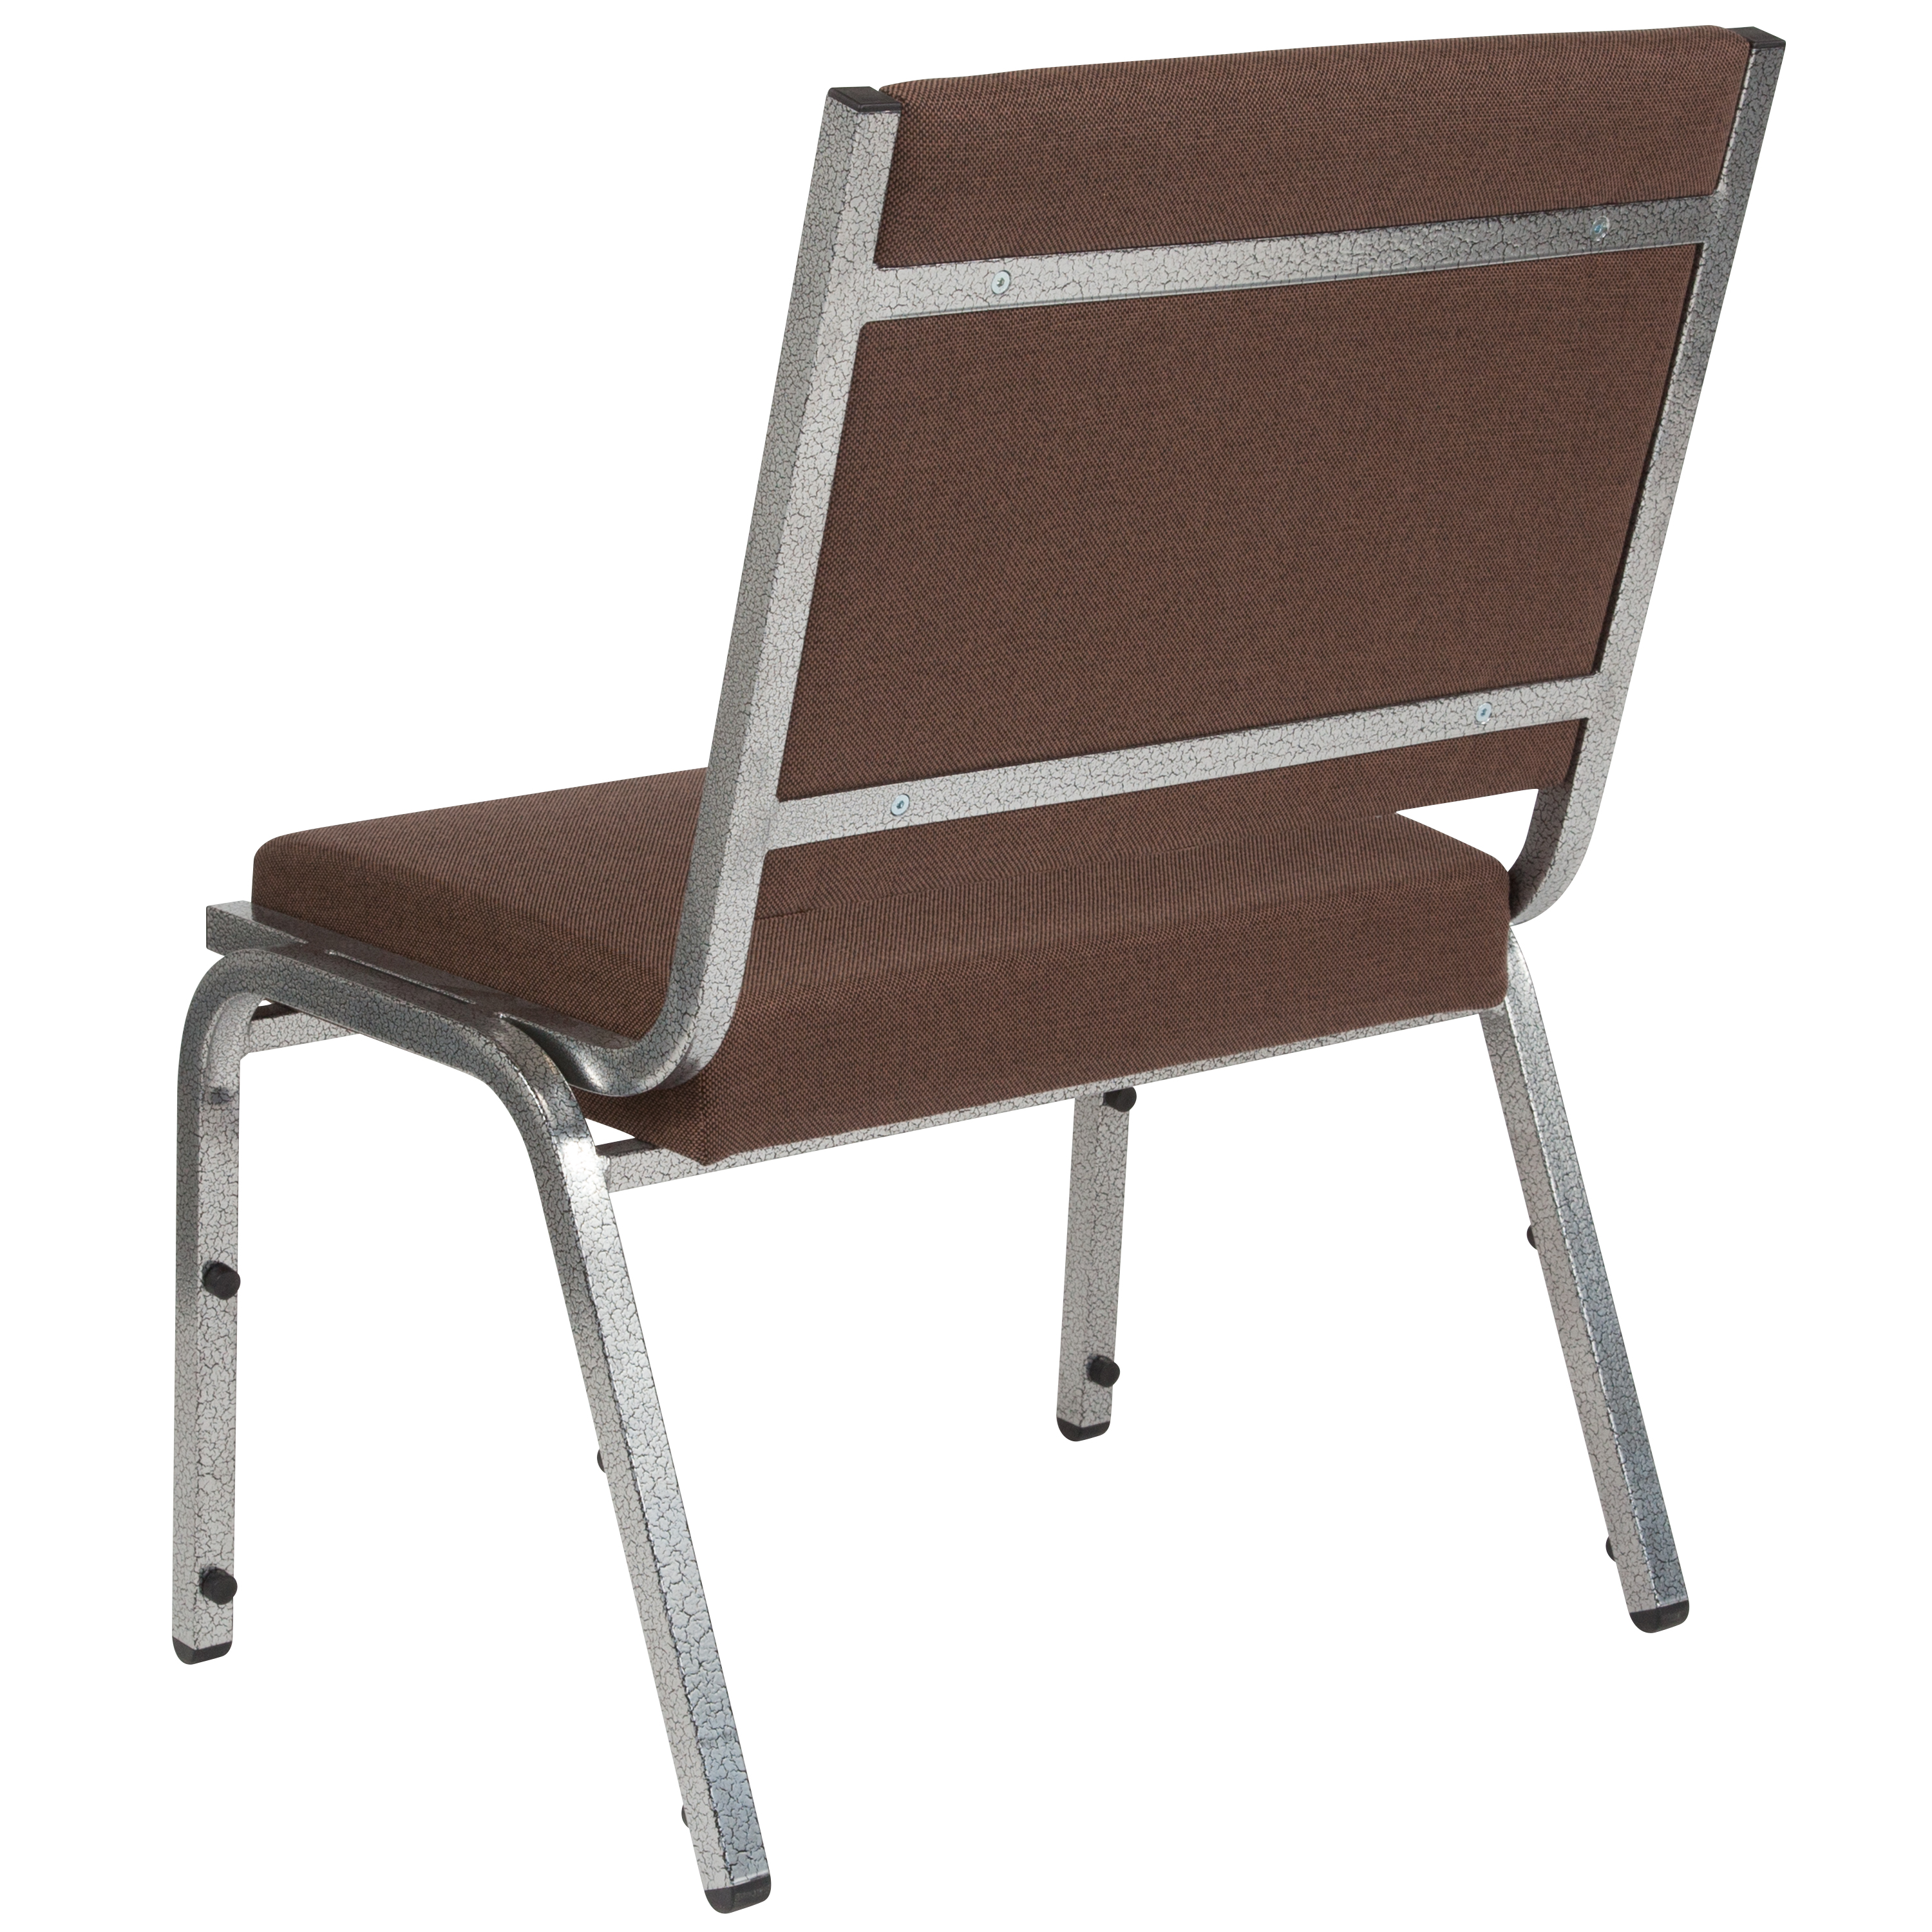 Flash Furniture HERCULES Series 1000 lb. Rated Brown Antimicrobial Fabric Bariatric Medical Reception Chair - image 4 of 6